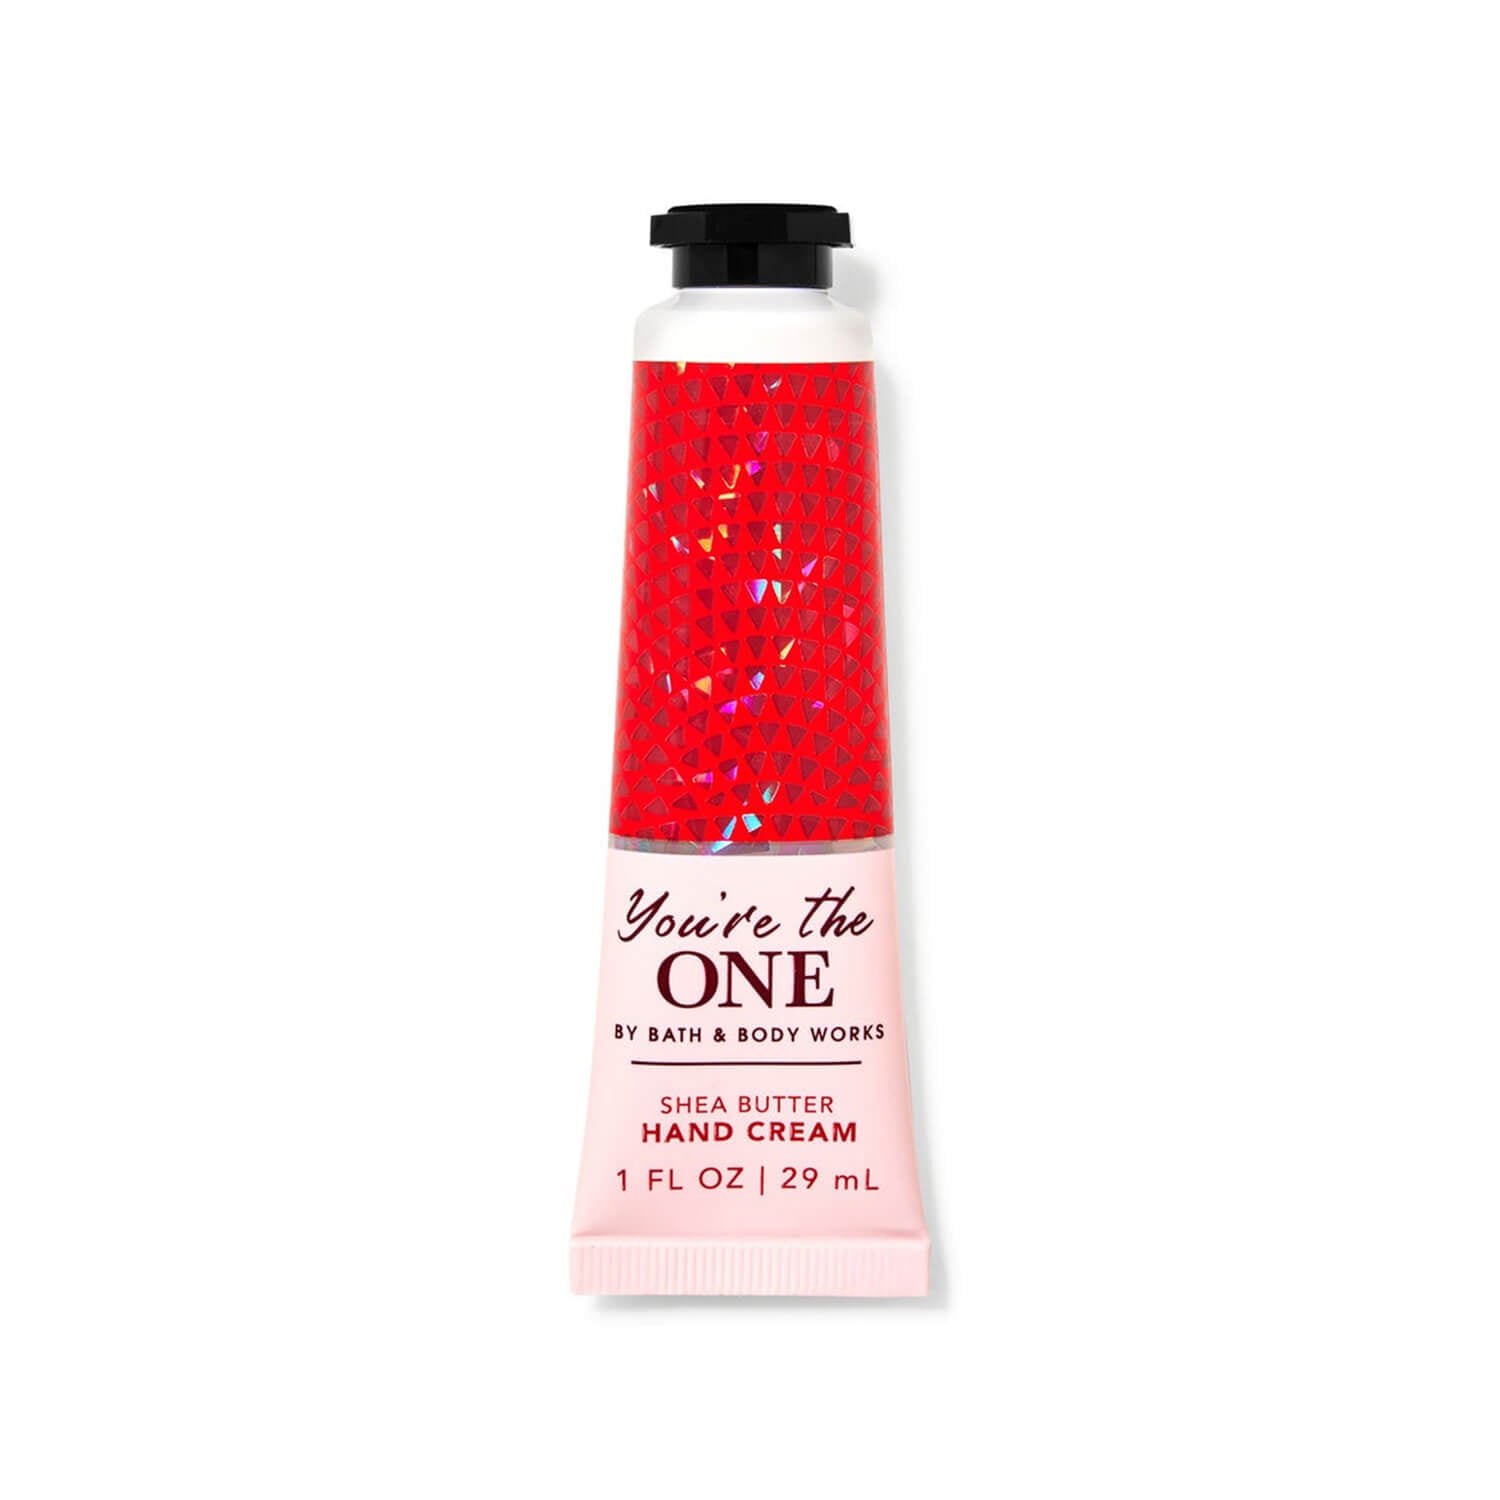 Bath and Body Works hand cream travel size you're the one available at Heygirl.pk for delivery in Karachi, Lahore, Islamabad across Pakistan. 